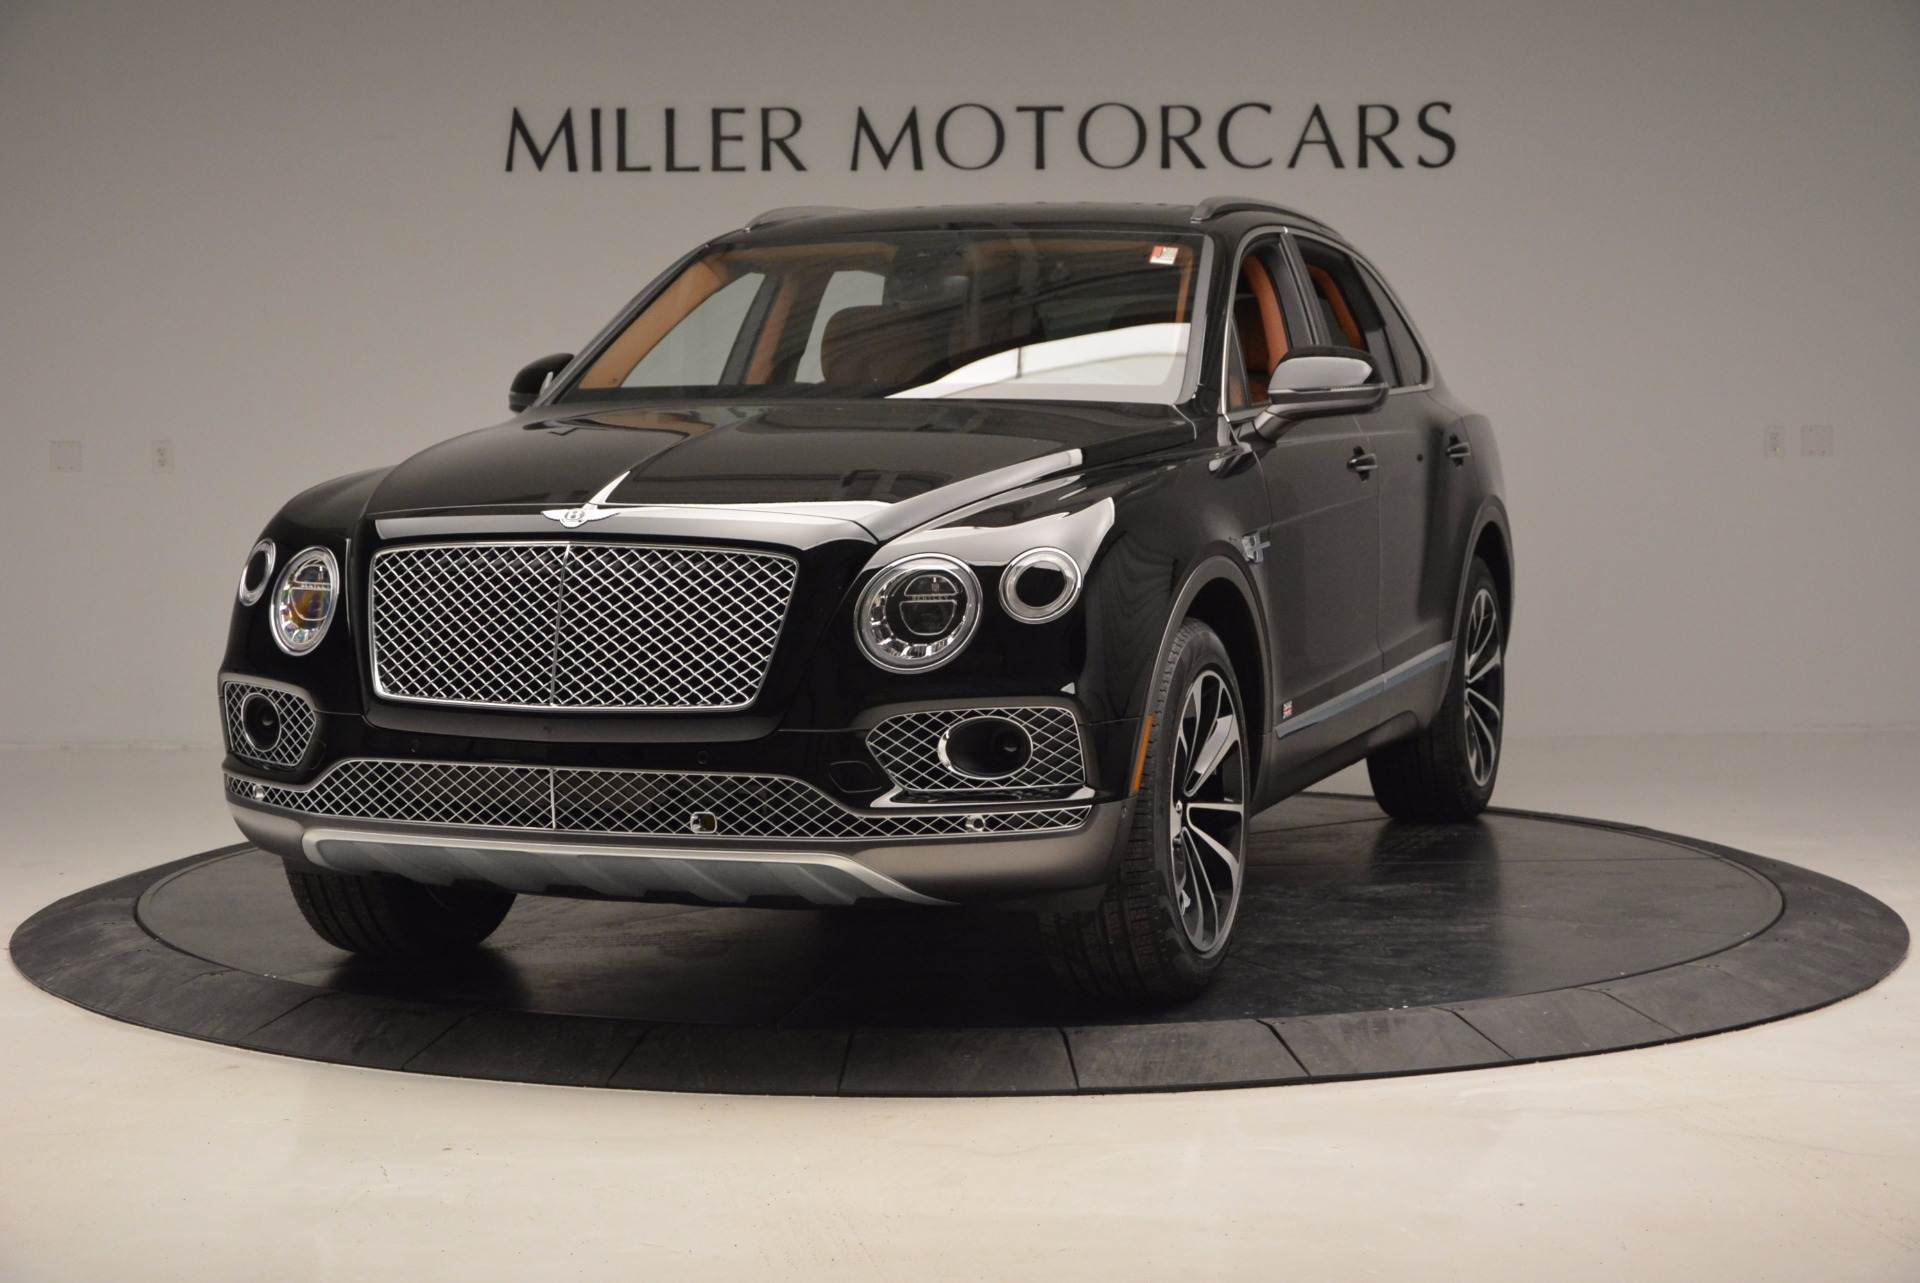 New 2017 Bentley Bentayga for sale Sold at Rolls-Royce Motor Cars Greenwich in Greenwich CT 06830 1